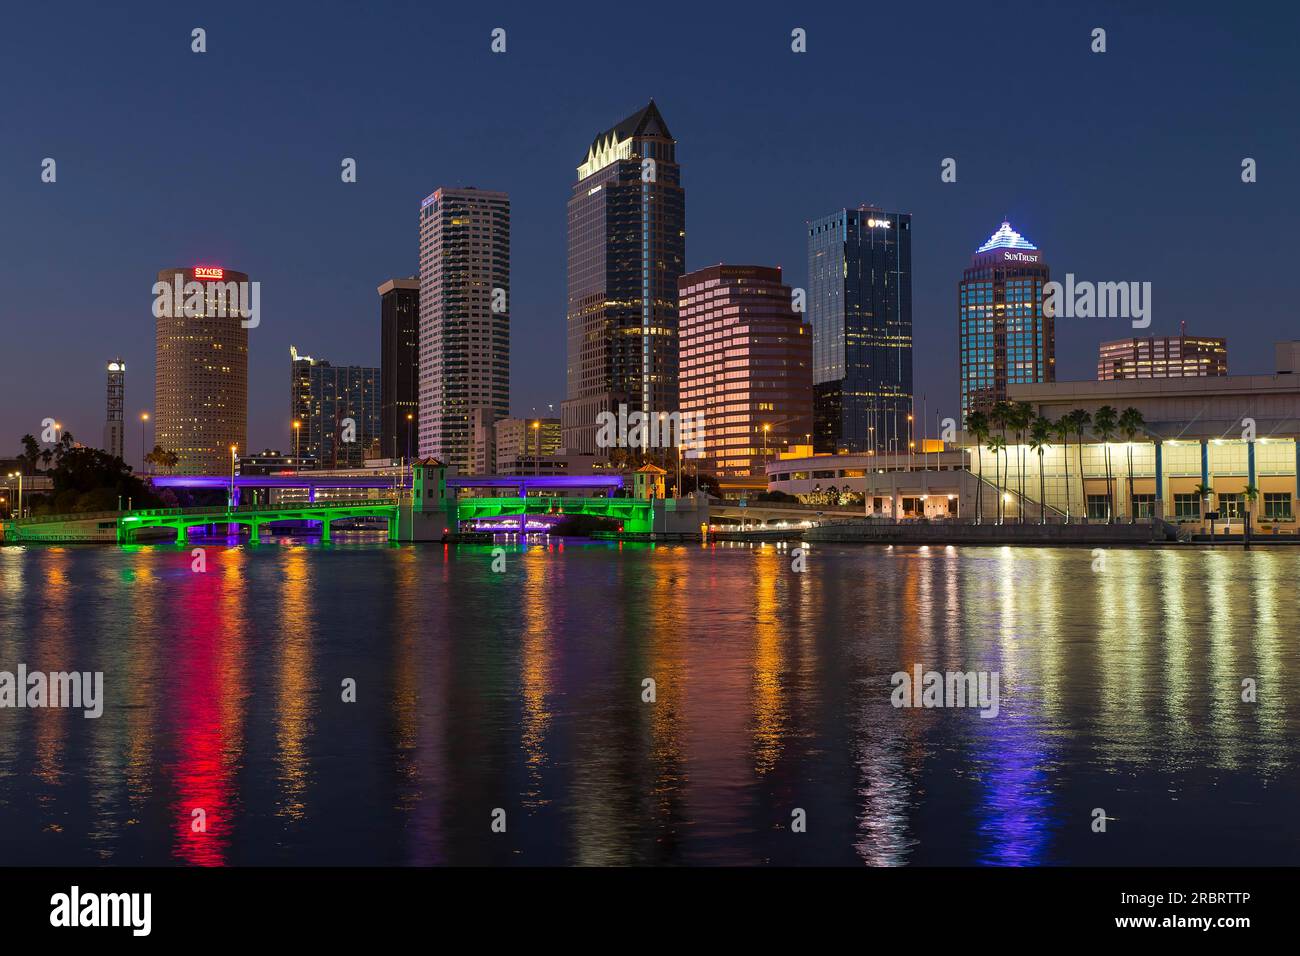 Tampa is a city in and the county seat of Hillsborough County, Florida, United States located on the west coast of Florida on Tampa Bay, near the Stock Photo